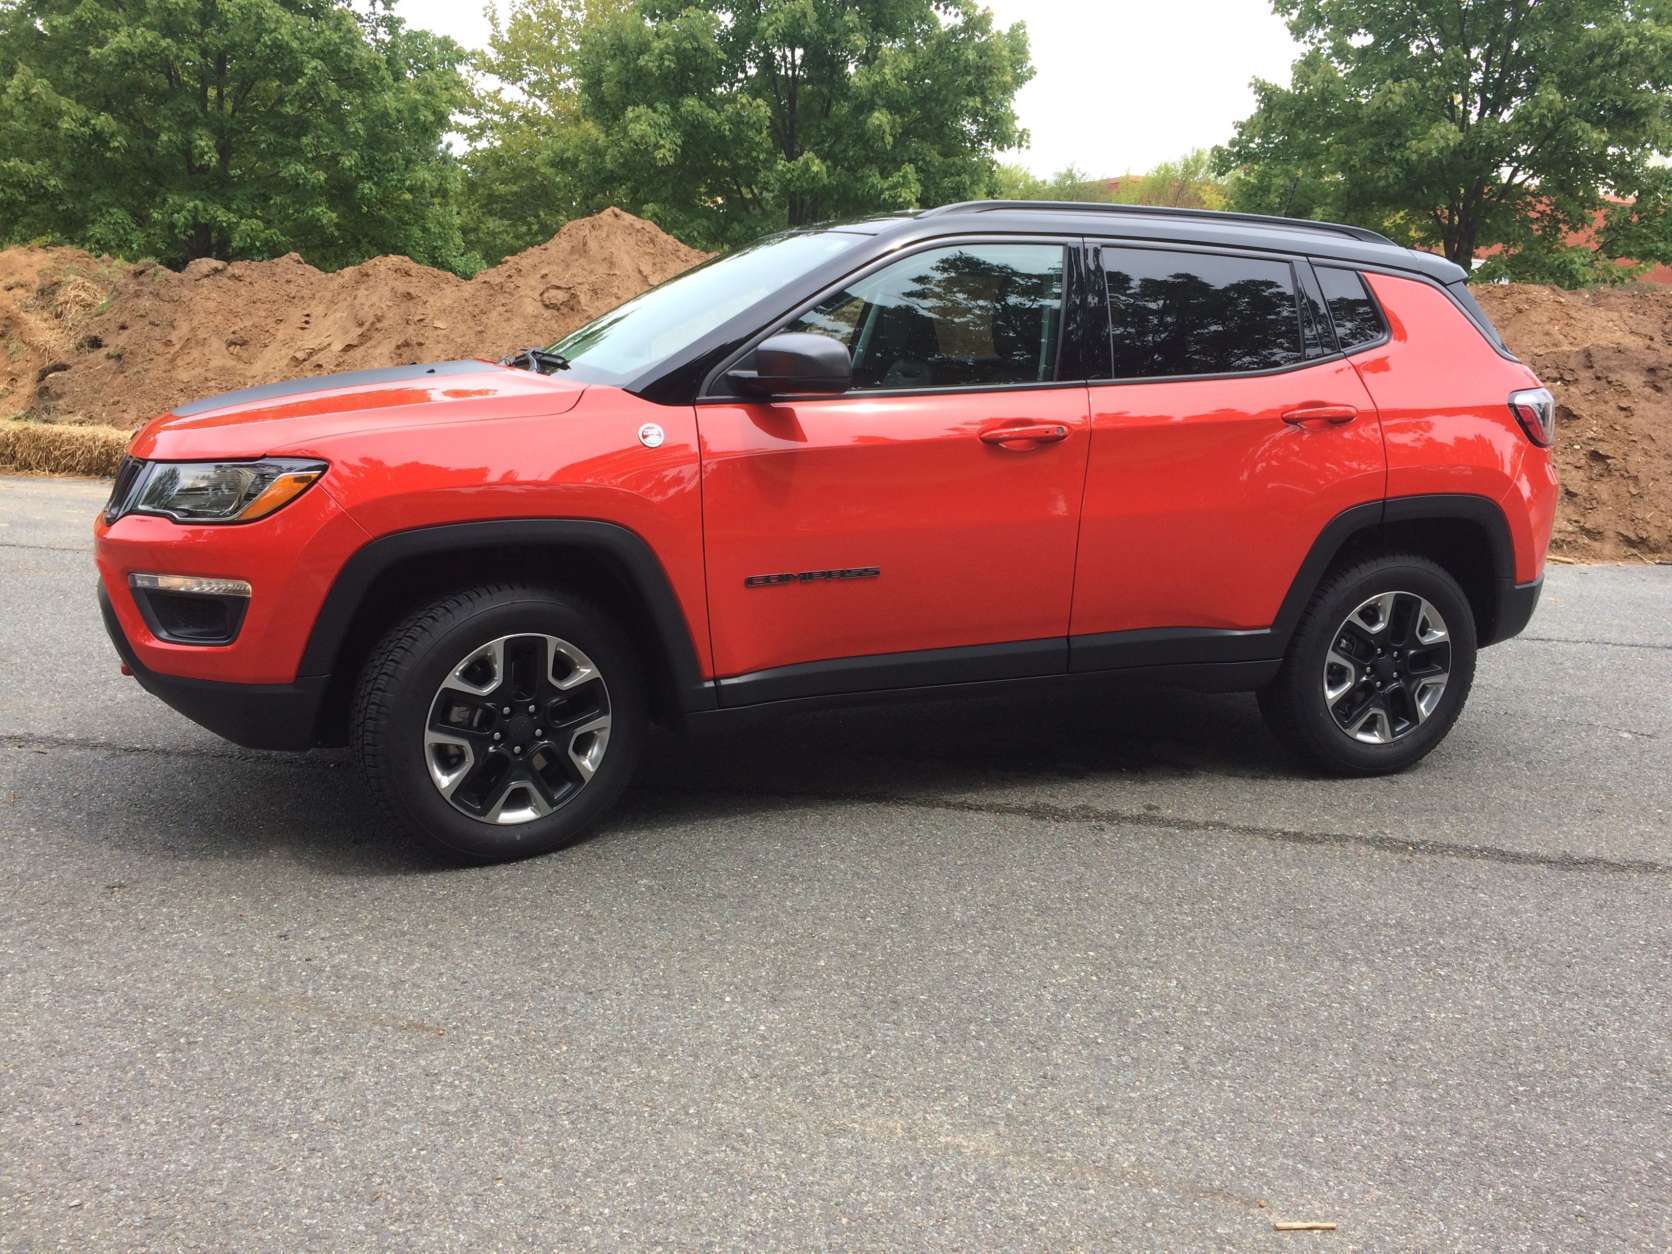 This is called the Trailhawk so this is off-road ready, and it could put other compact crossovers to shame. There is an off-road suspension and skid plates to protect the underside when you tackle the trail.(WTOP/Mike Parris)